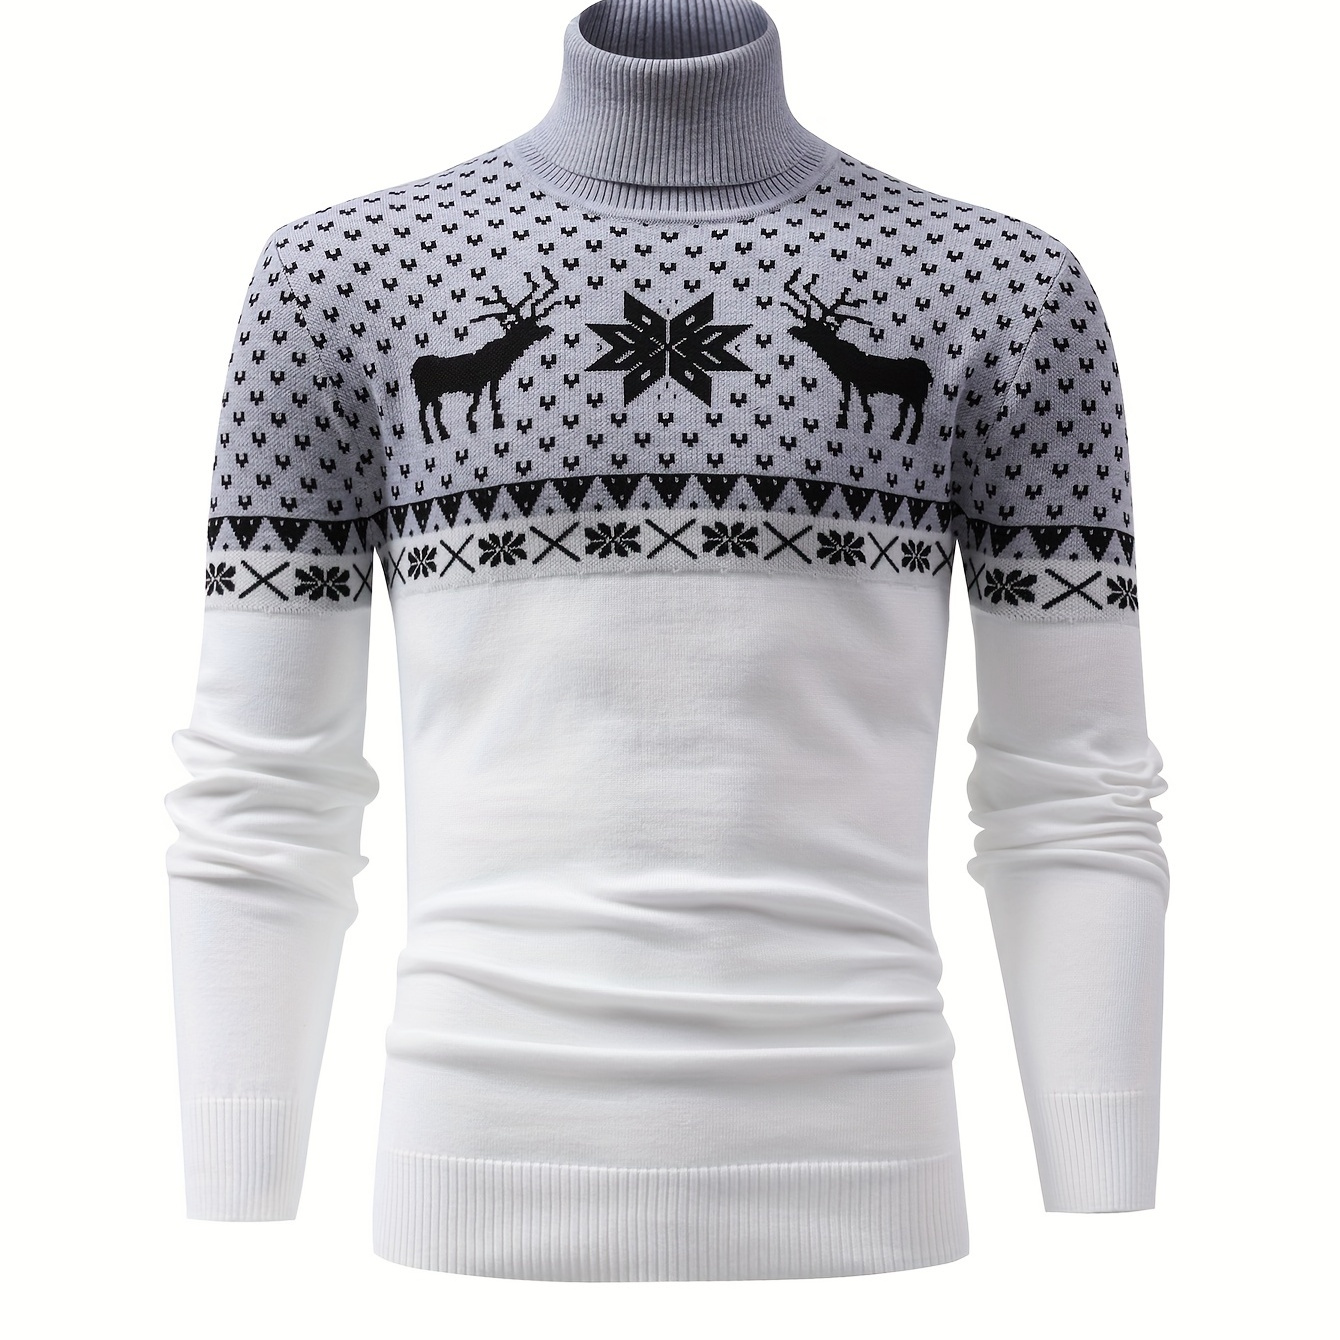 

Men's Turtleneck Retro Pattern Print Fashionable Casual Sweater, Simple And Fashionable, Suitable For Autumn And Winter